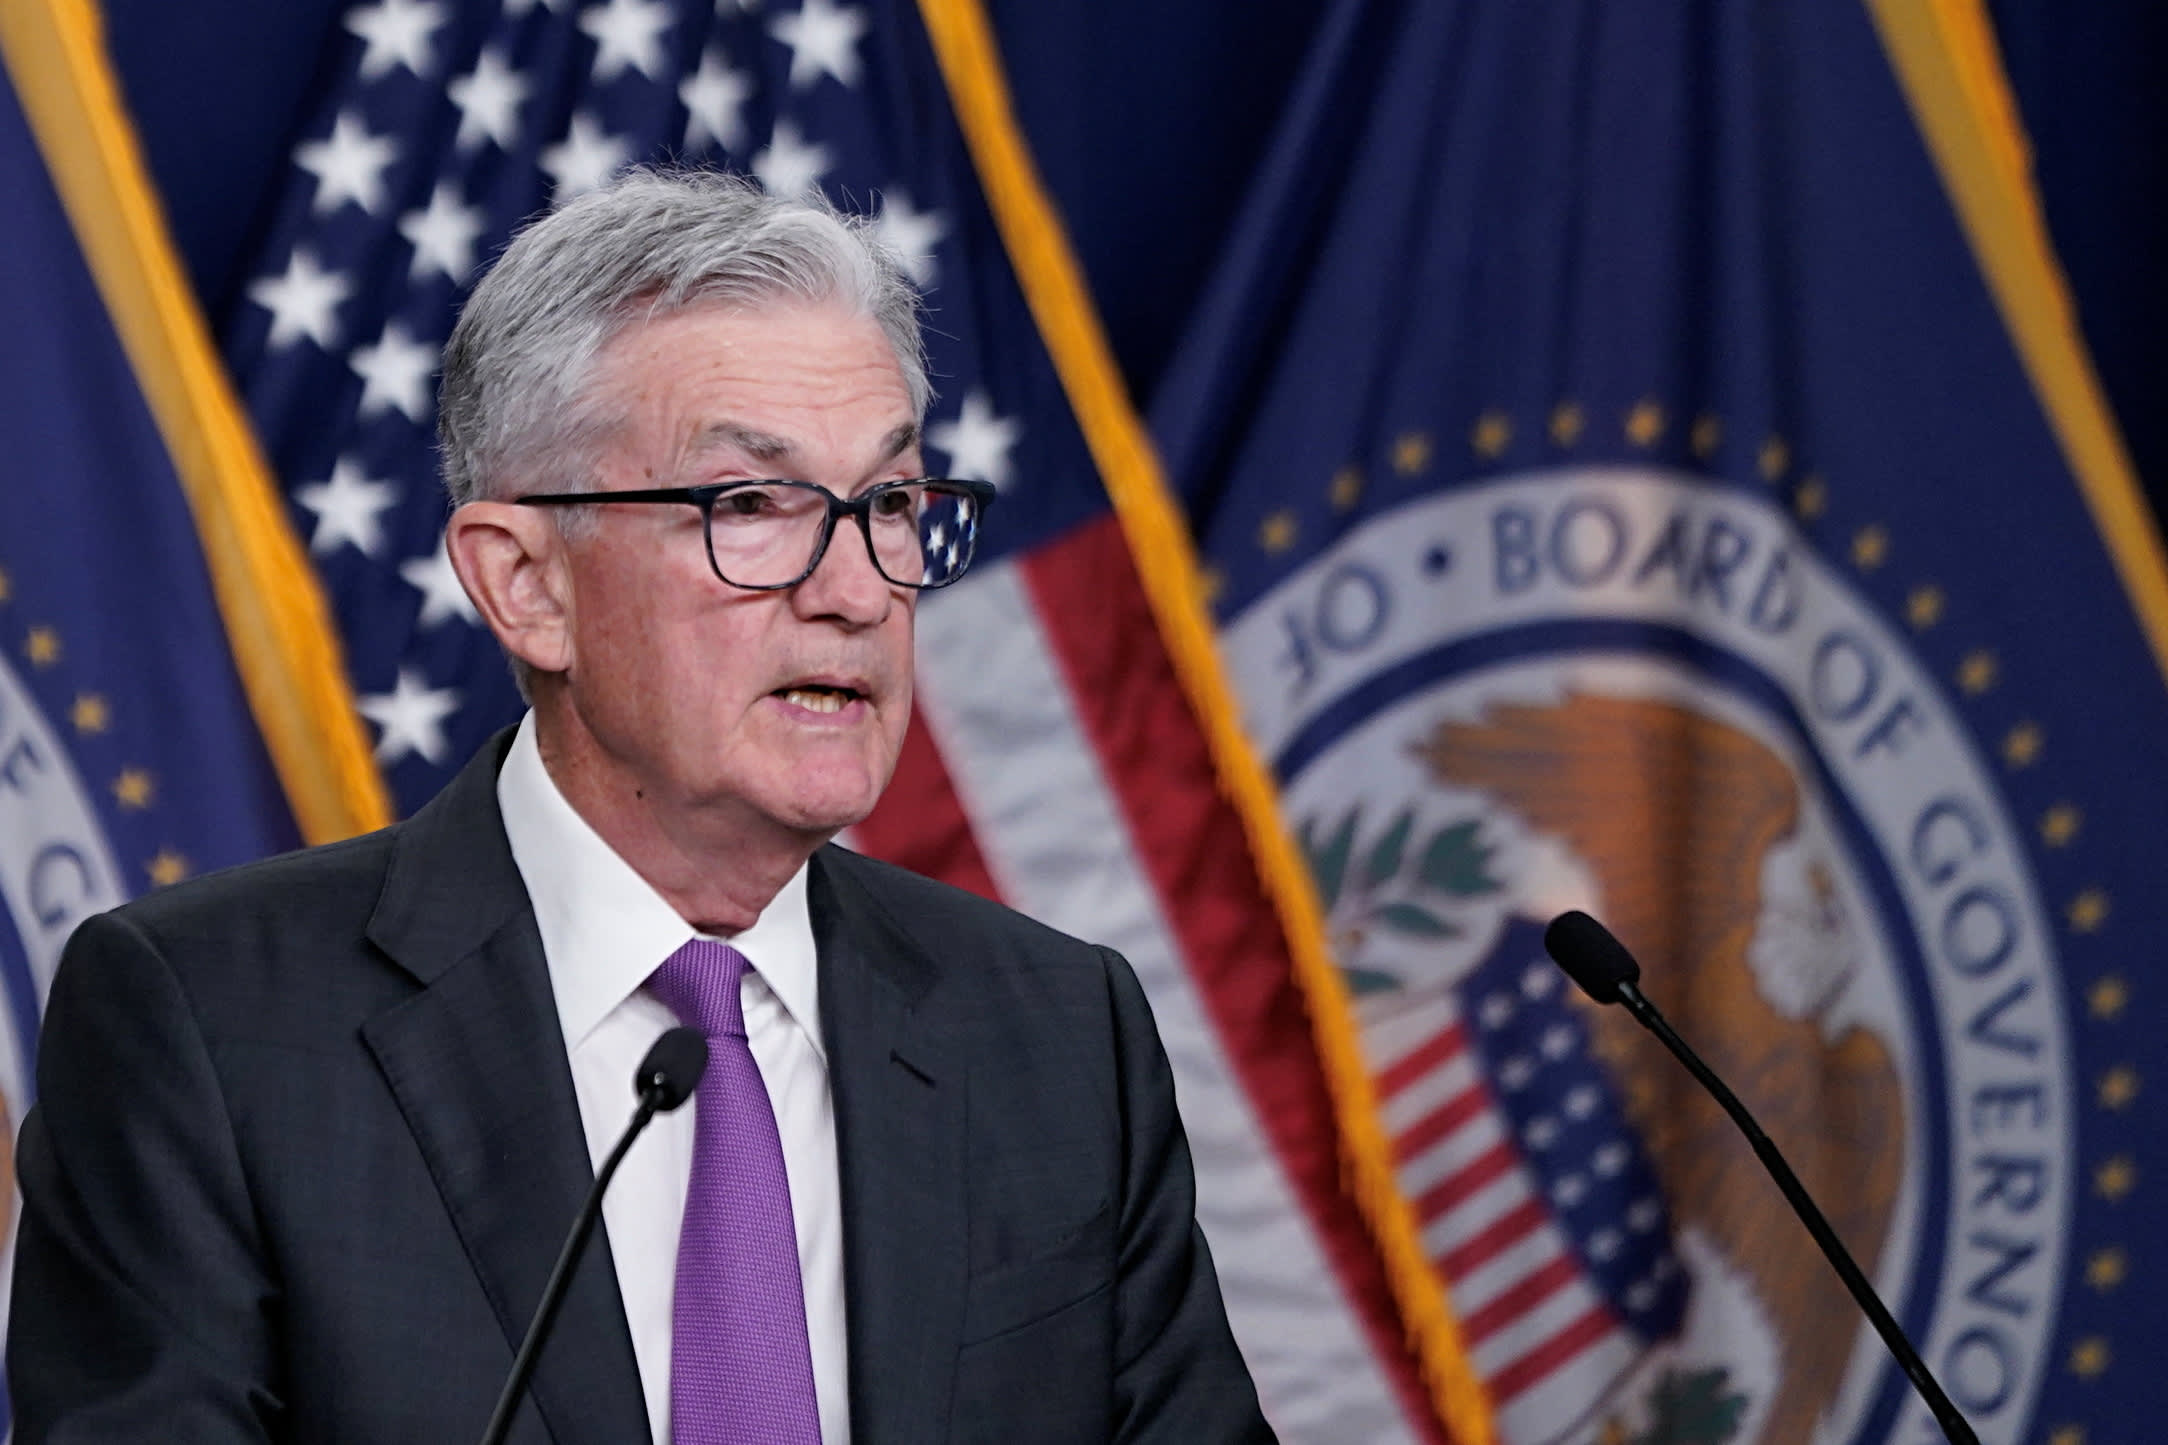 Wall Street economists say rate hikes are over, even if the Fed won't admit it